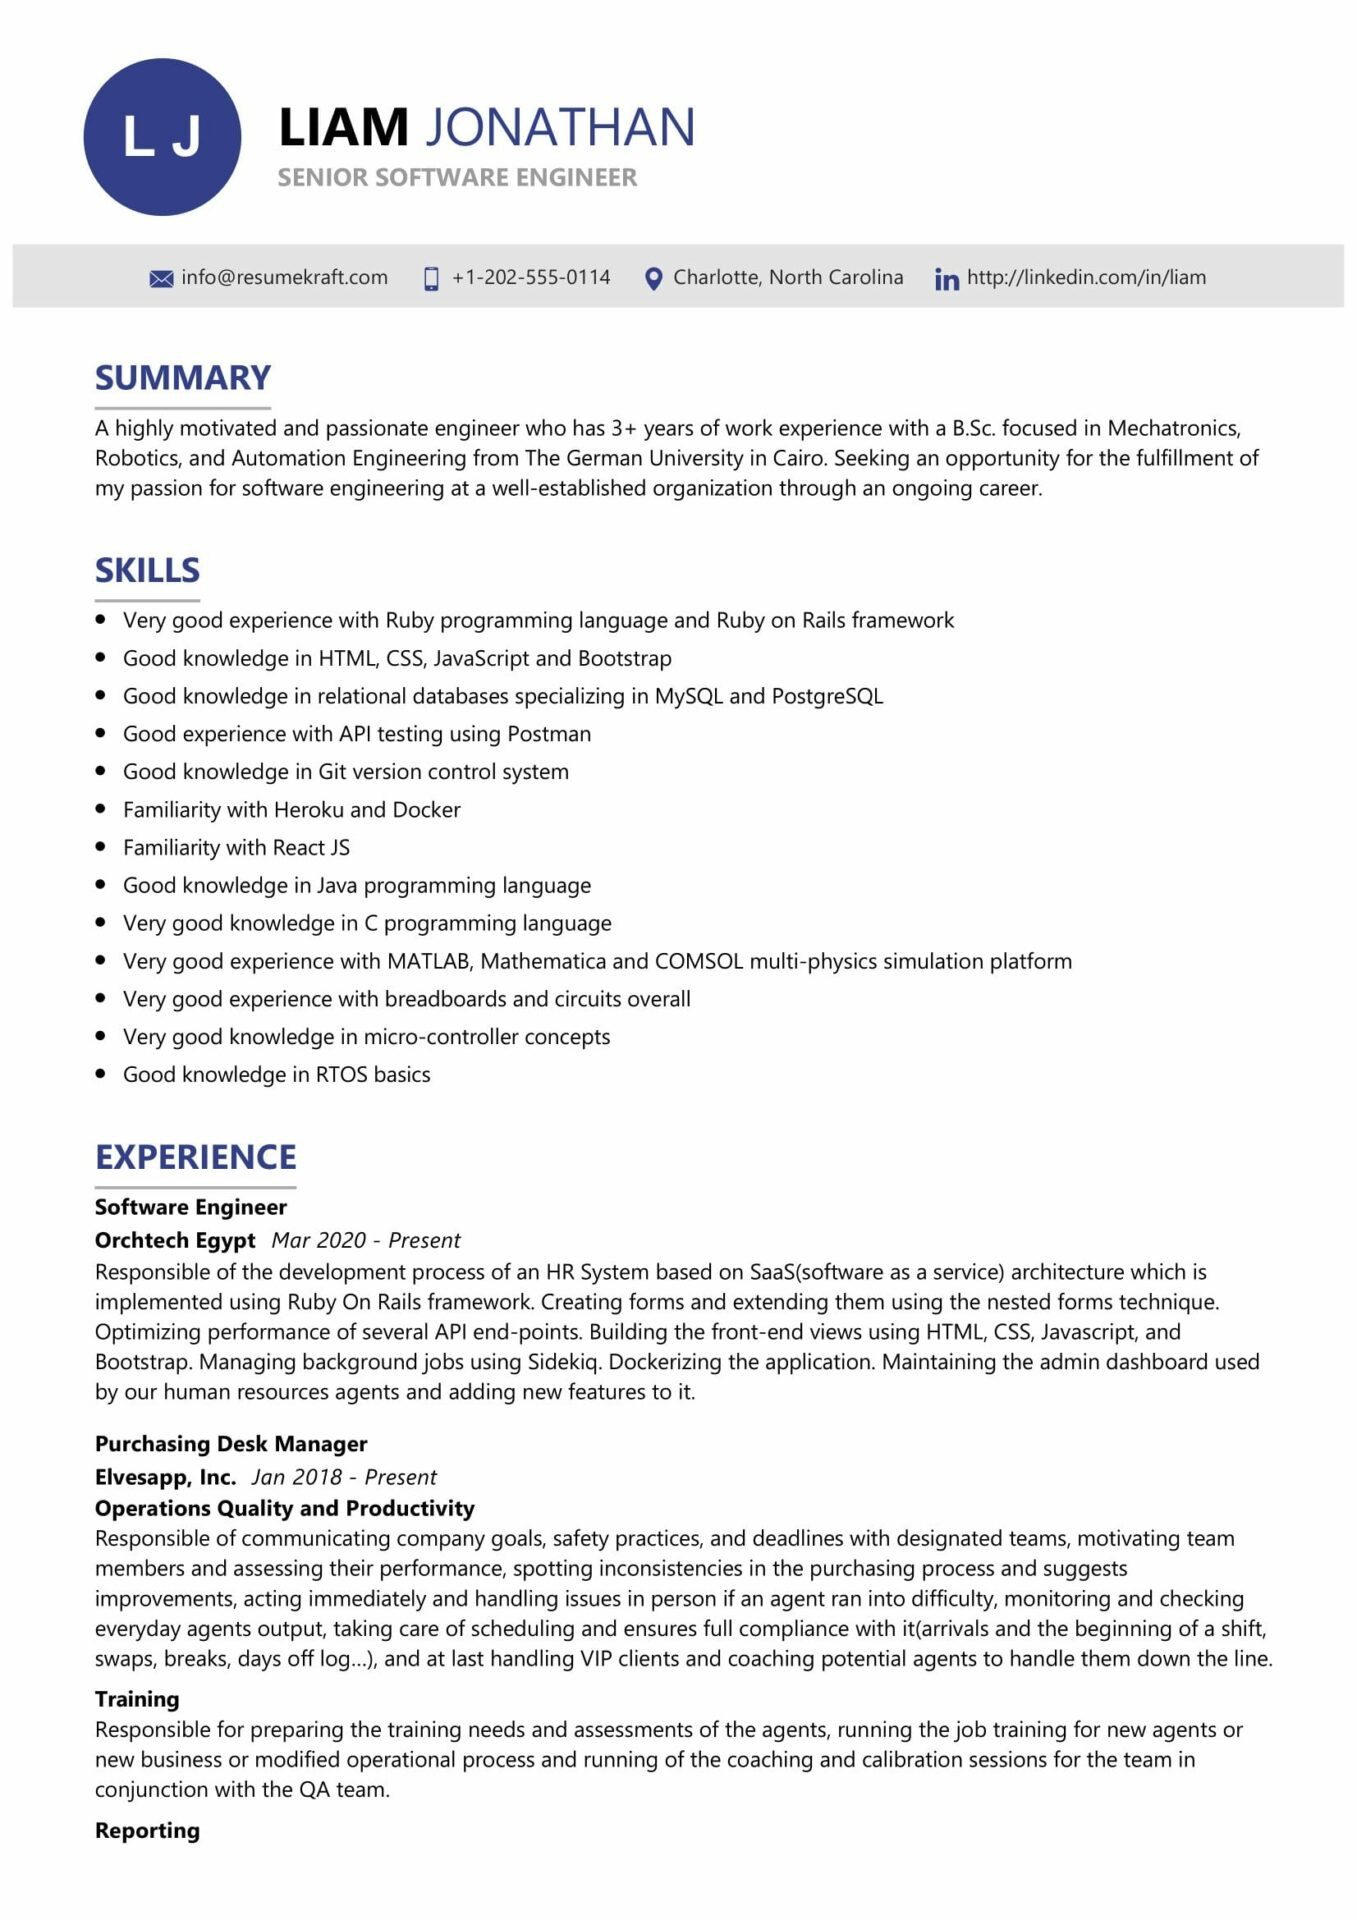 Sample Resume for Lead software Engineer 7 Awesome software Engineering Resumes [lancarrezekiq Tips & Templates]